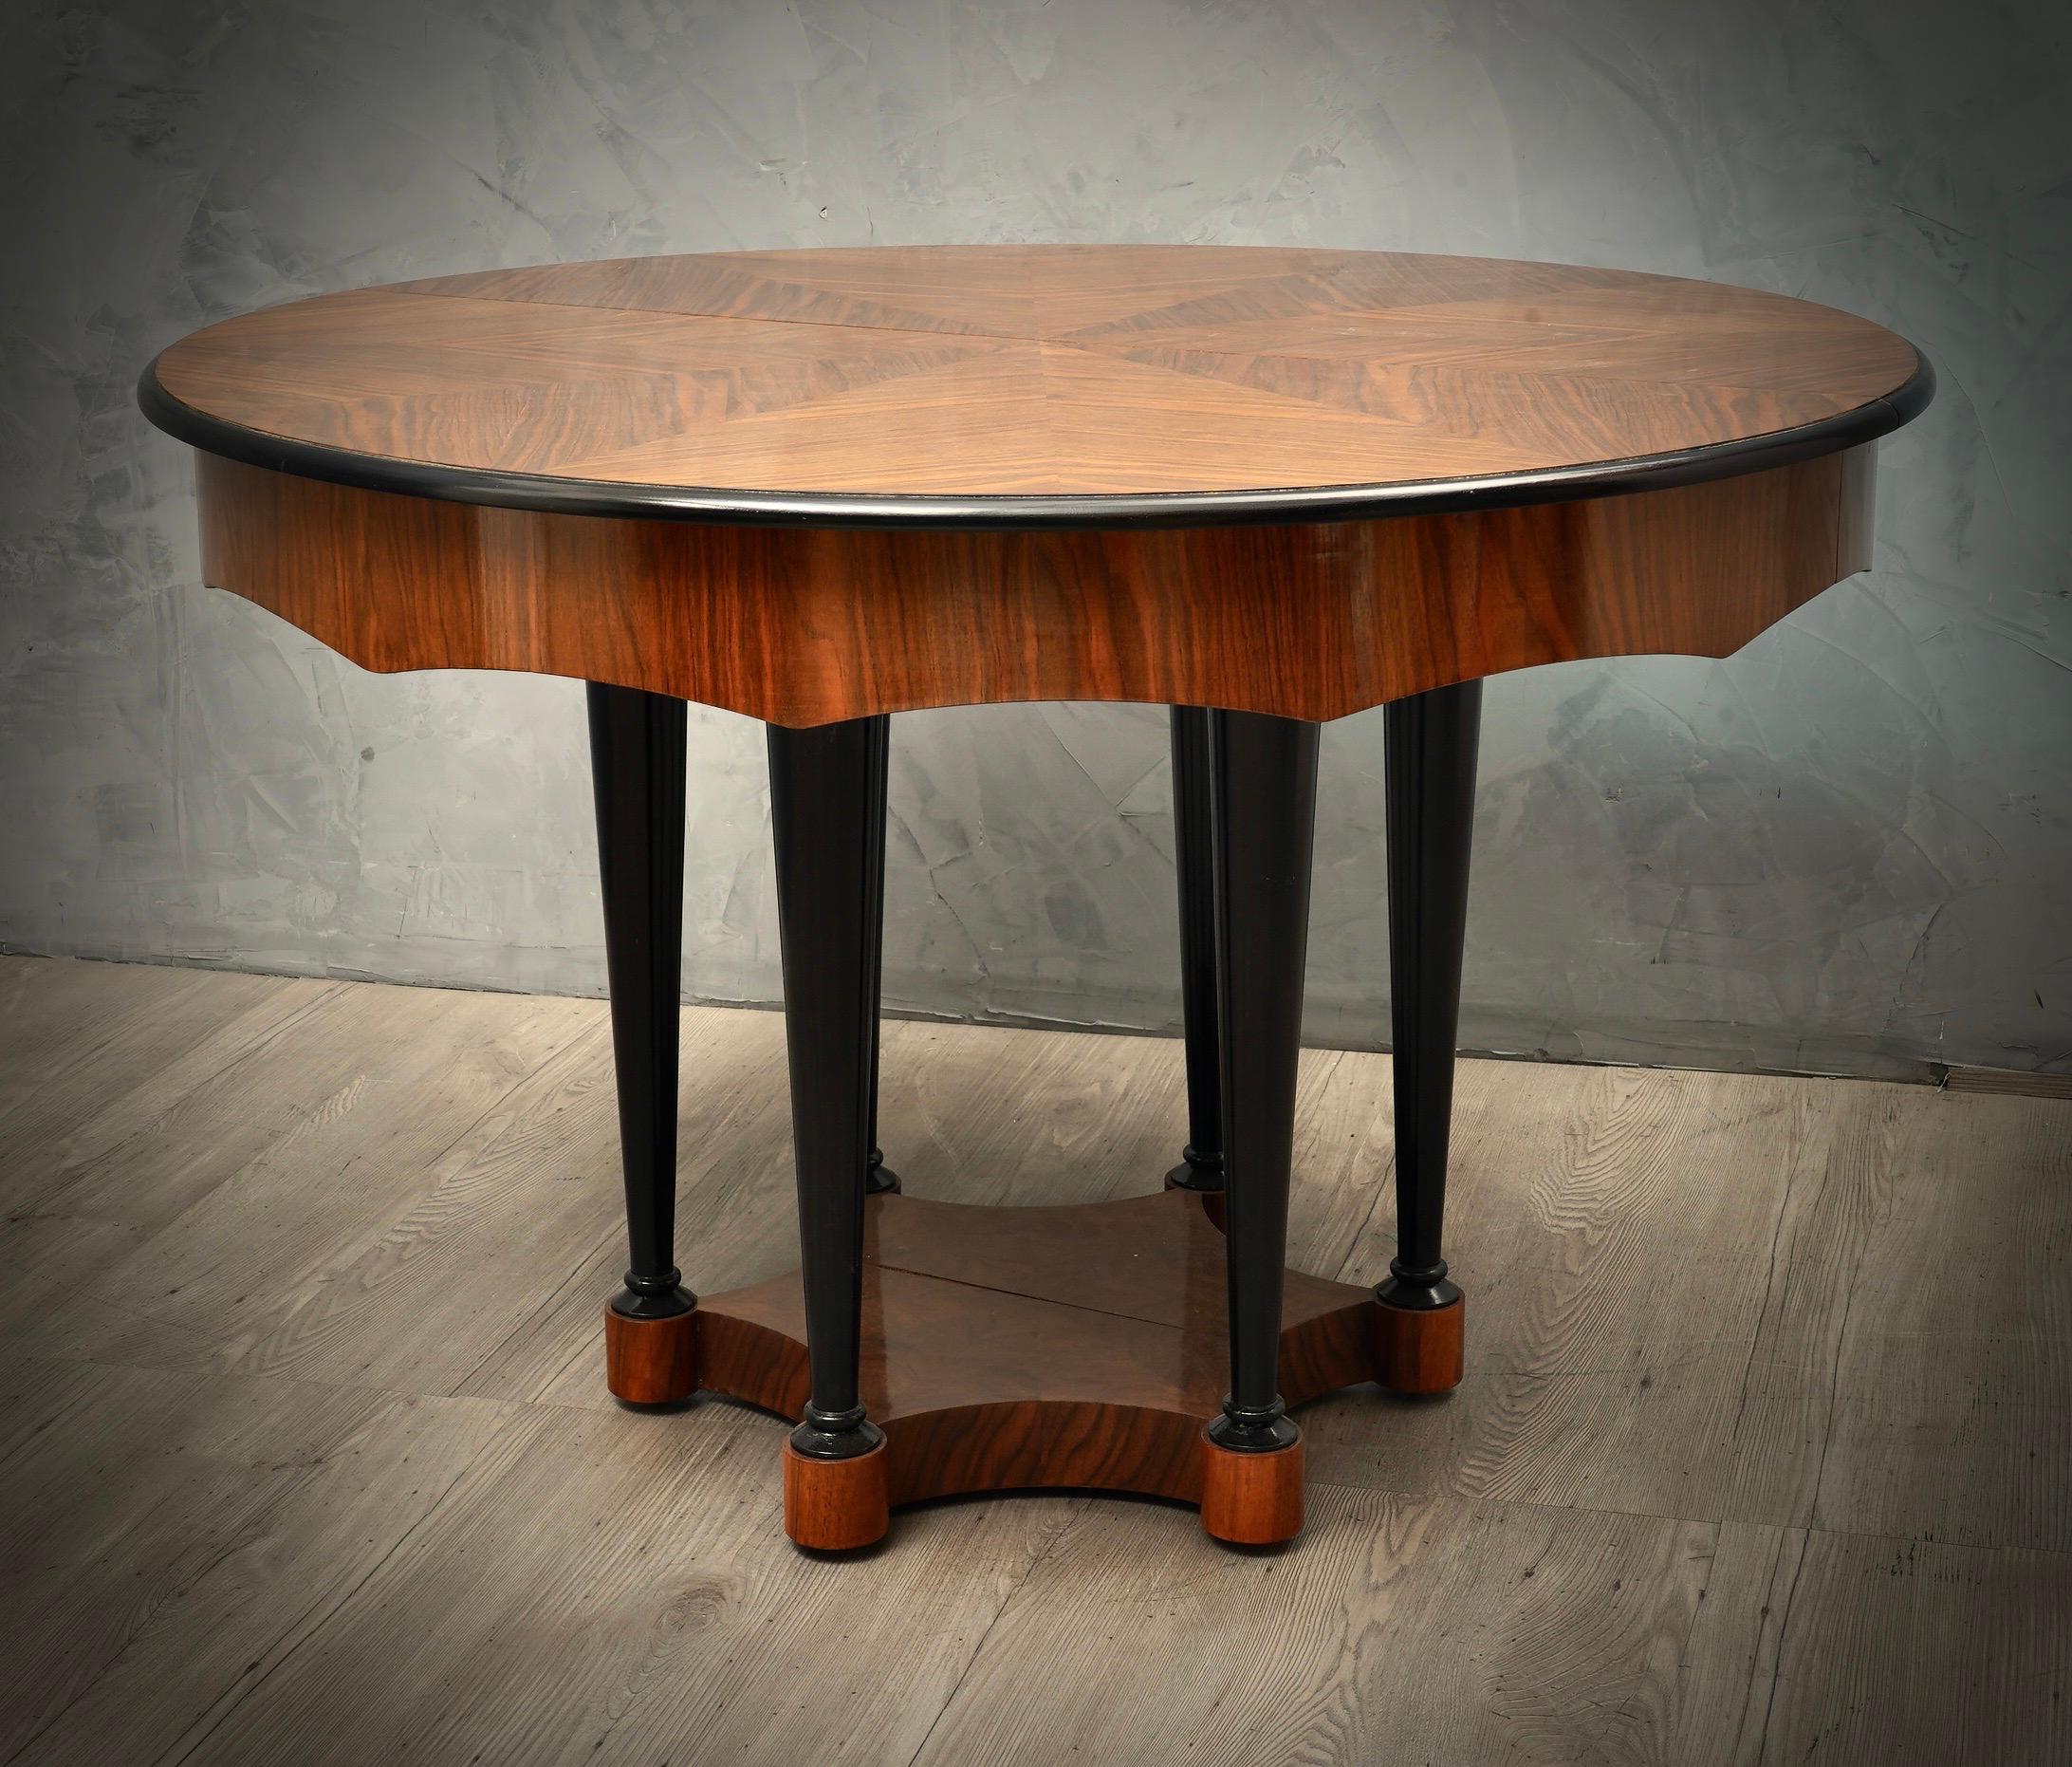 Late 19th Century Biedermeier Round Walnut Wood Extendable Dinning Table, 1890 For Sale